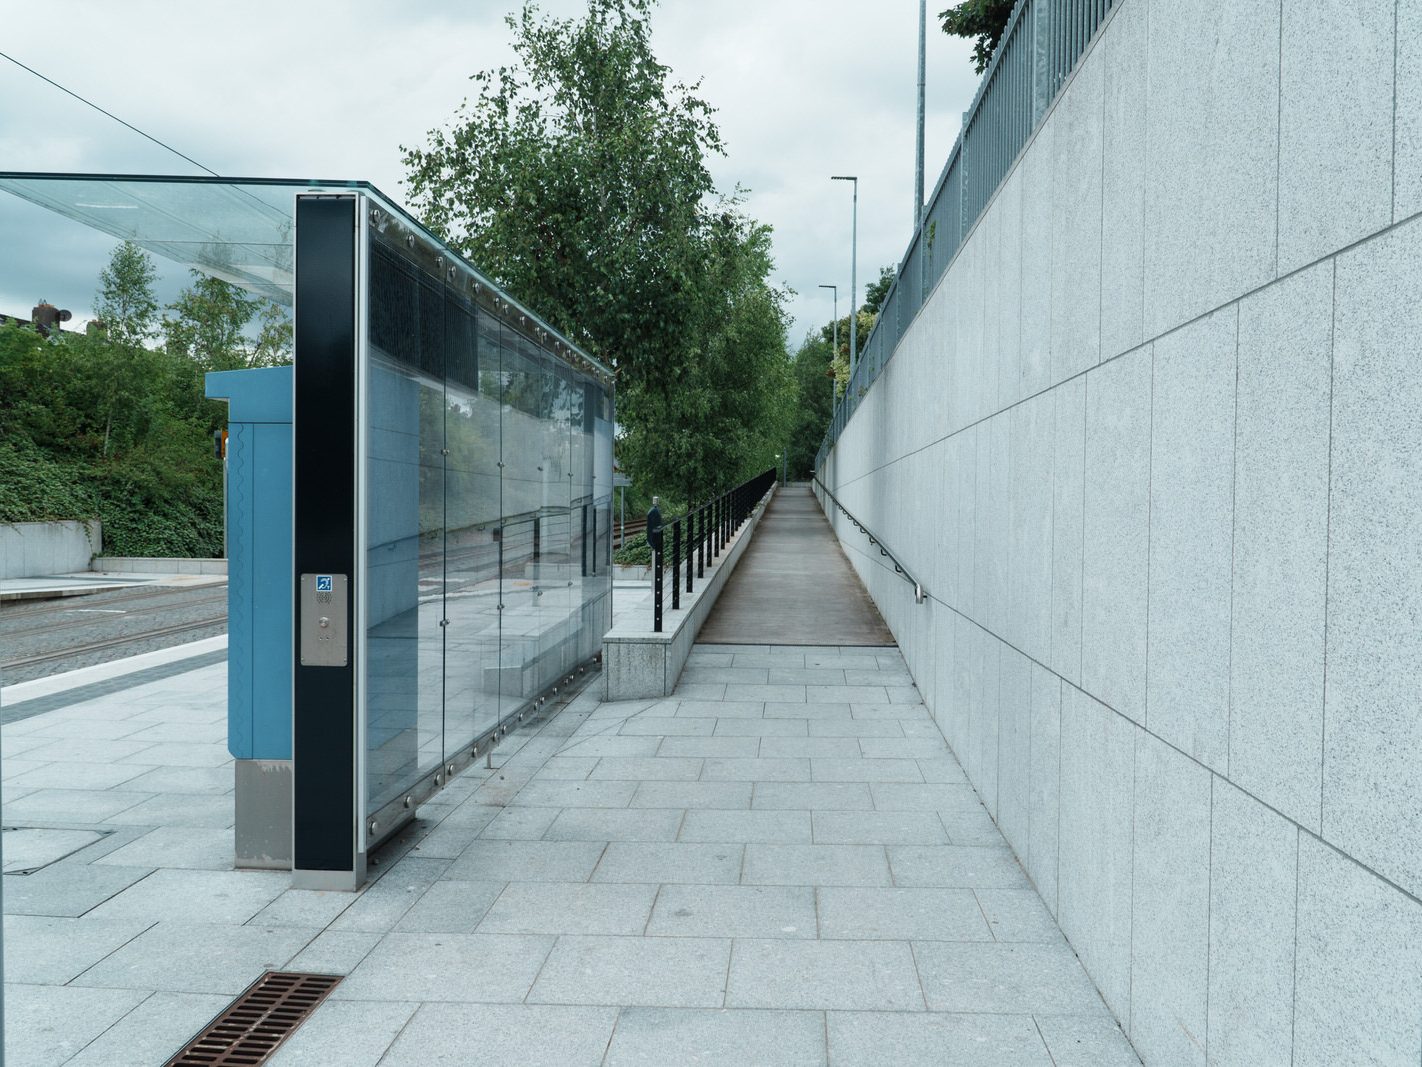 CABRA LUAS TRAM STOP ON CONNAUGHT STREET [GOOGLE BARD INCORRECTLY CLAIMED THAT THERE IS A PUBLIC TOILET AND A TICKET OFFICE] 015